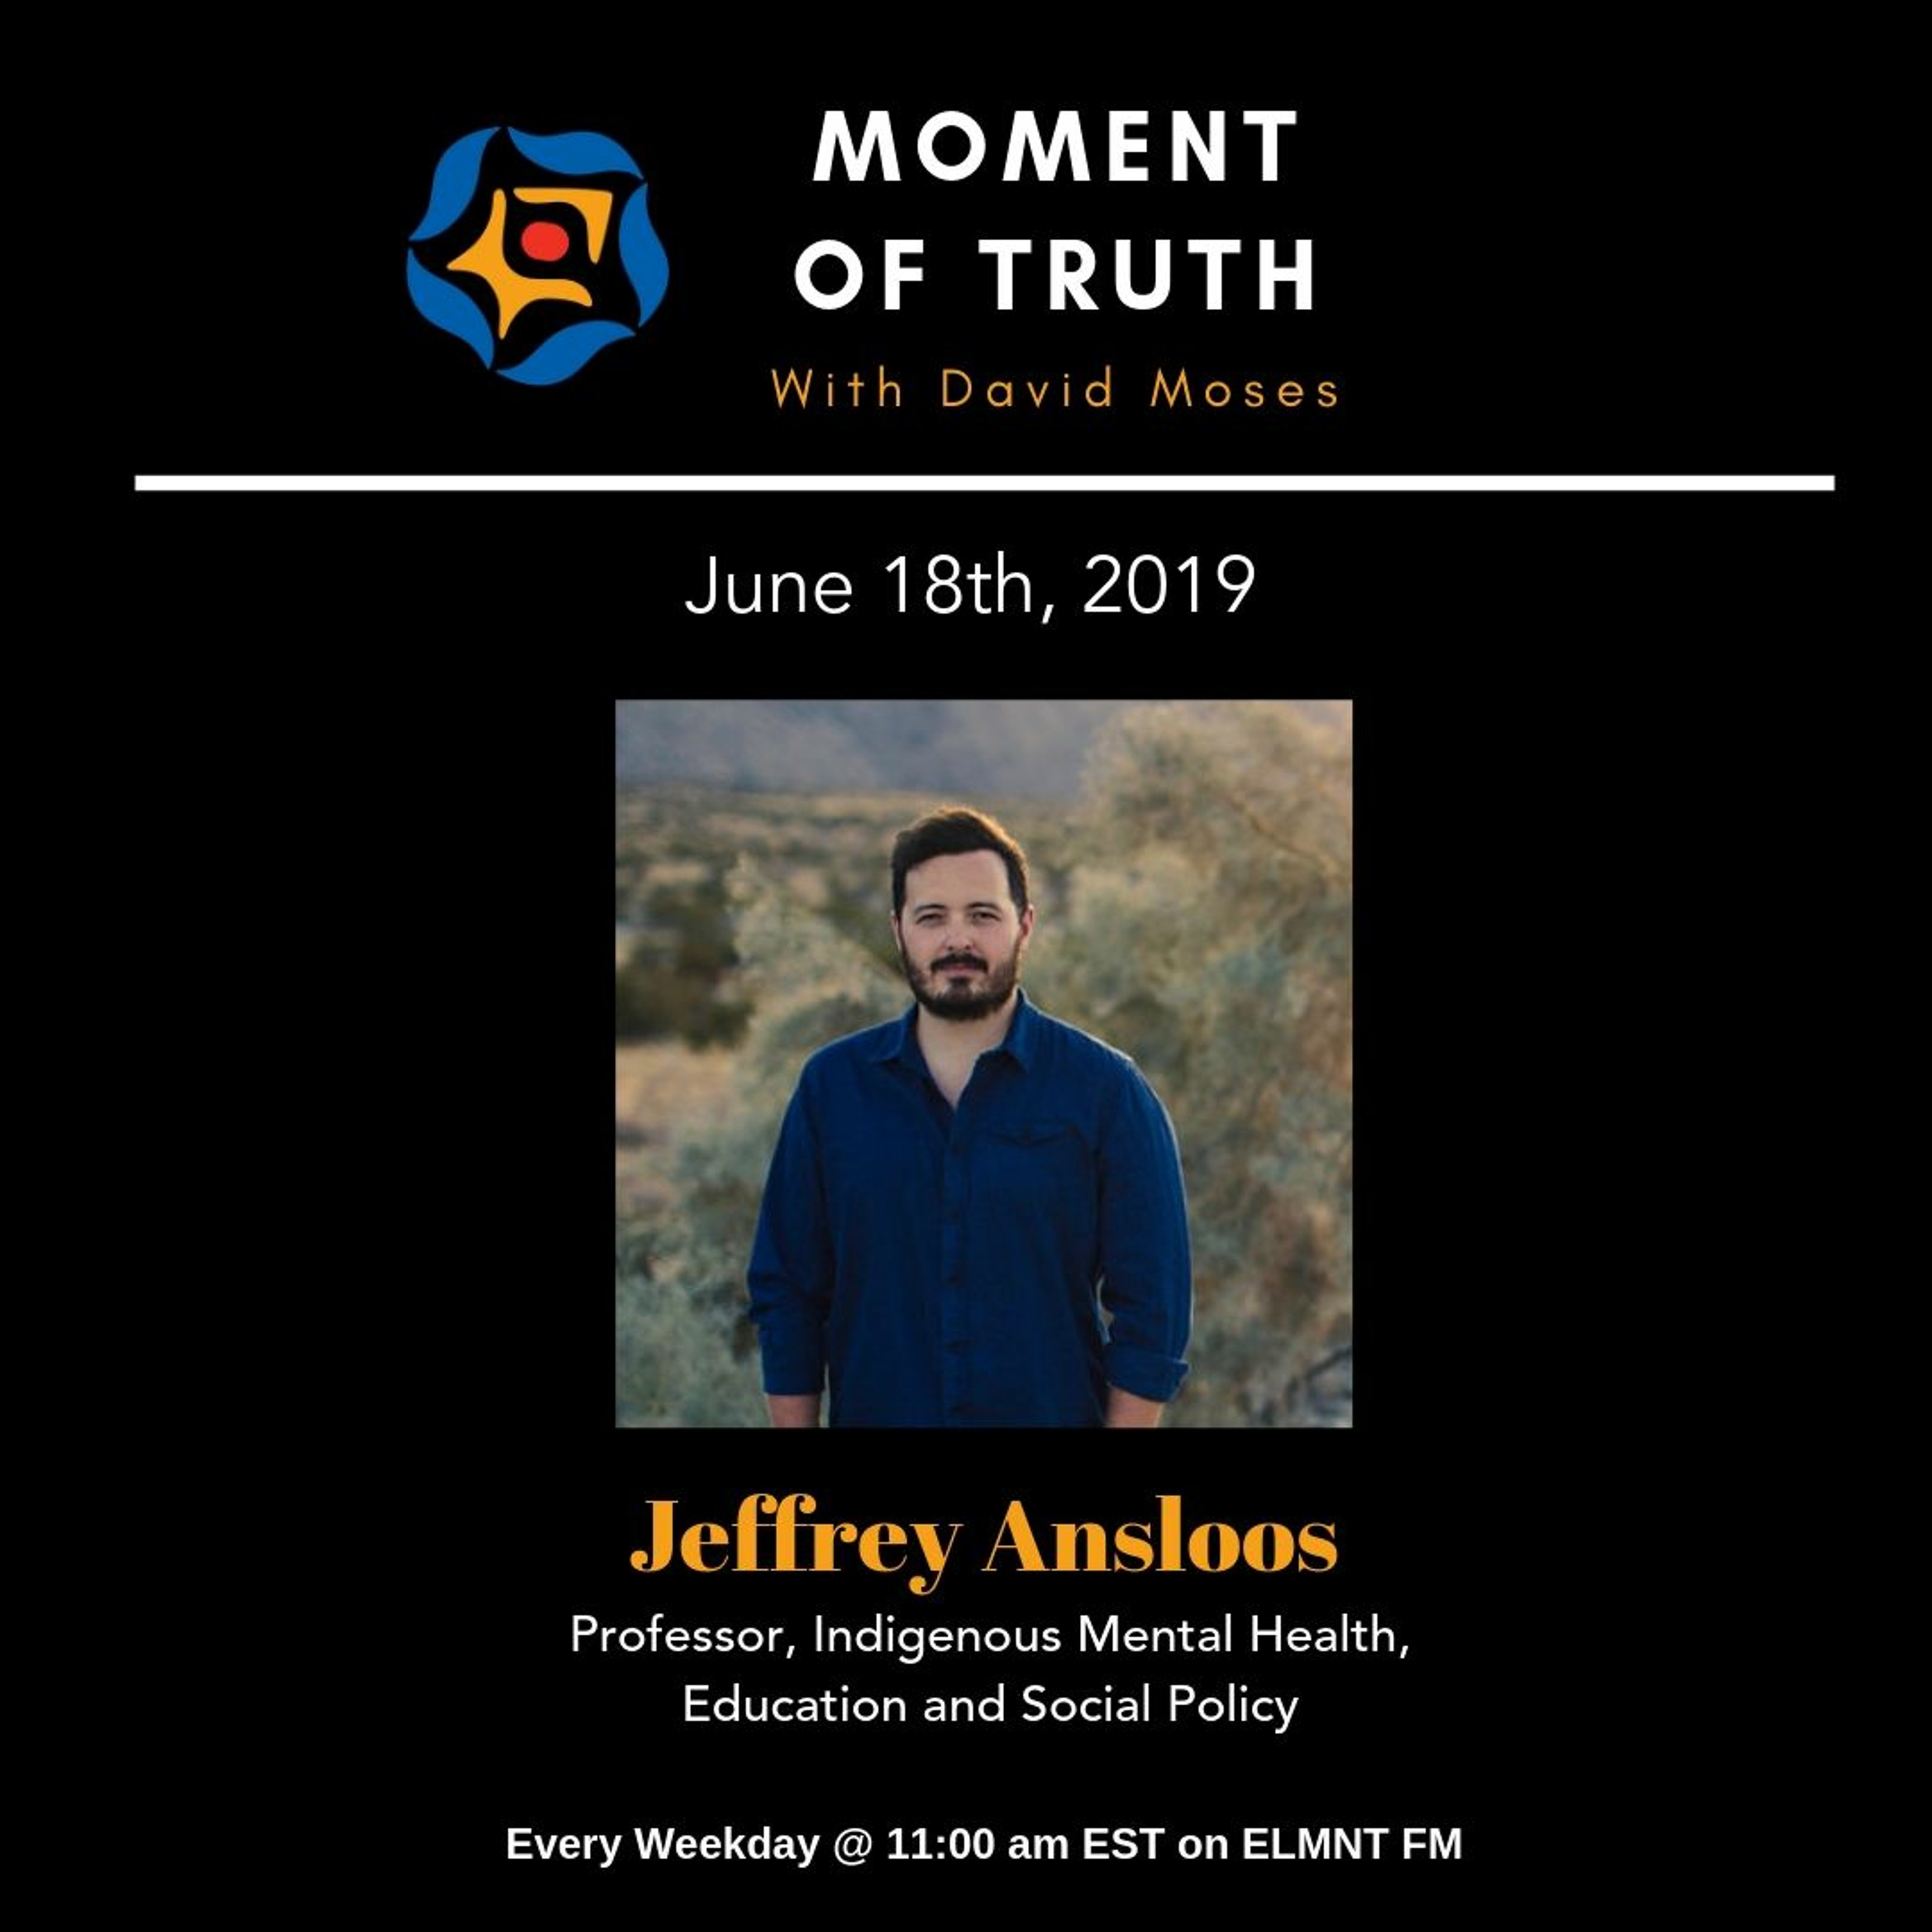 MOMENT OF TRUTH - Jeffrey Ansloos (June 18th, 2019)